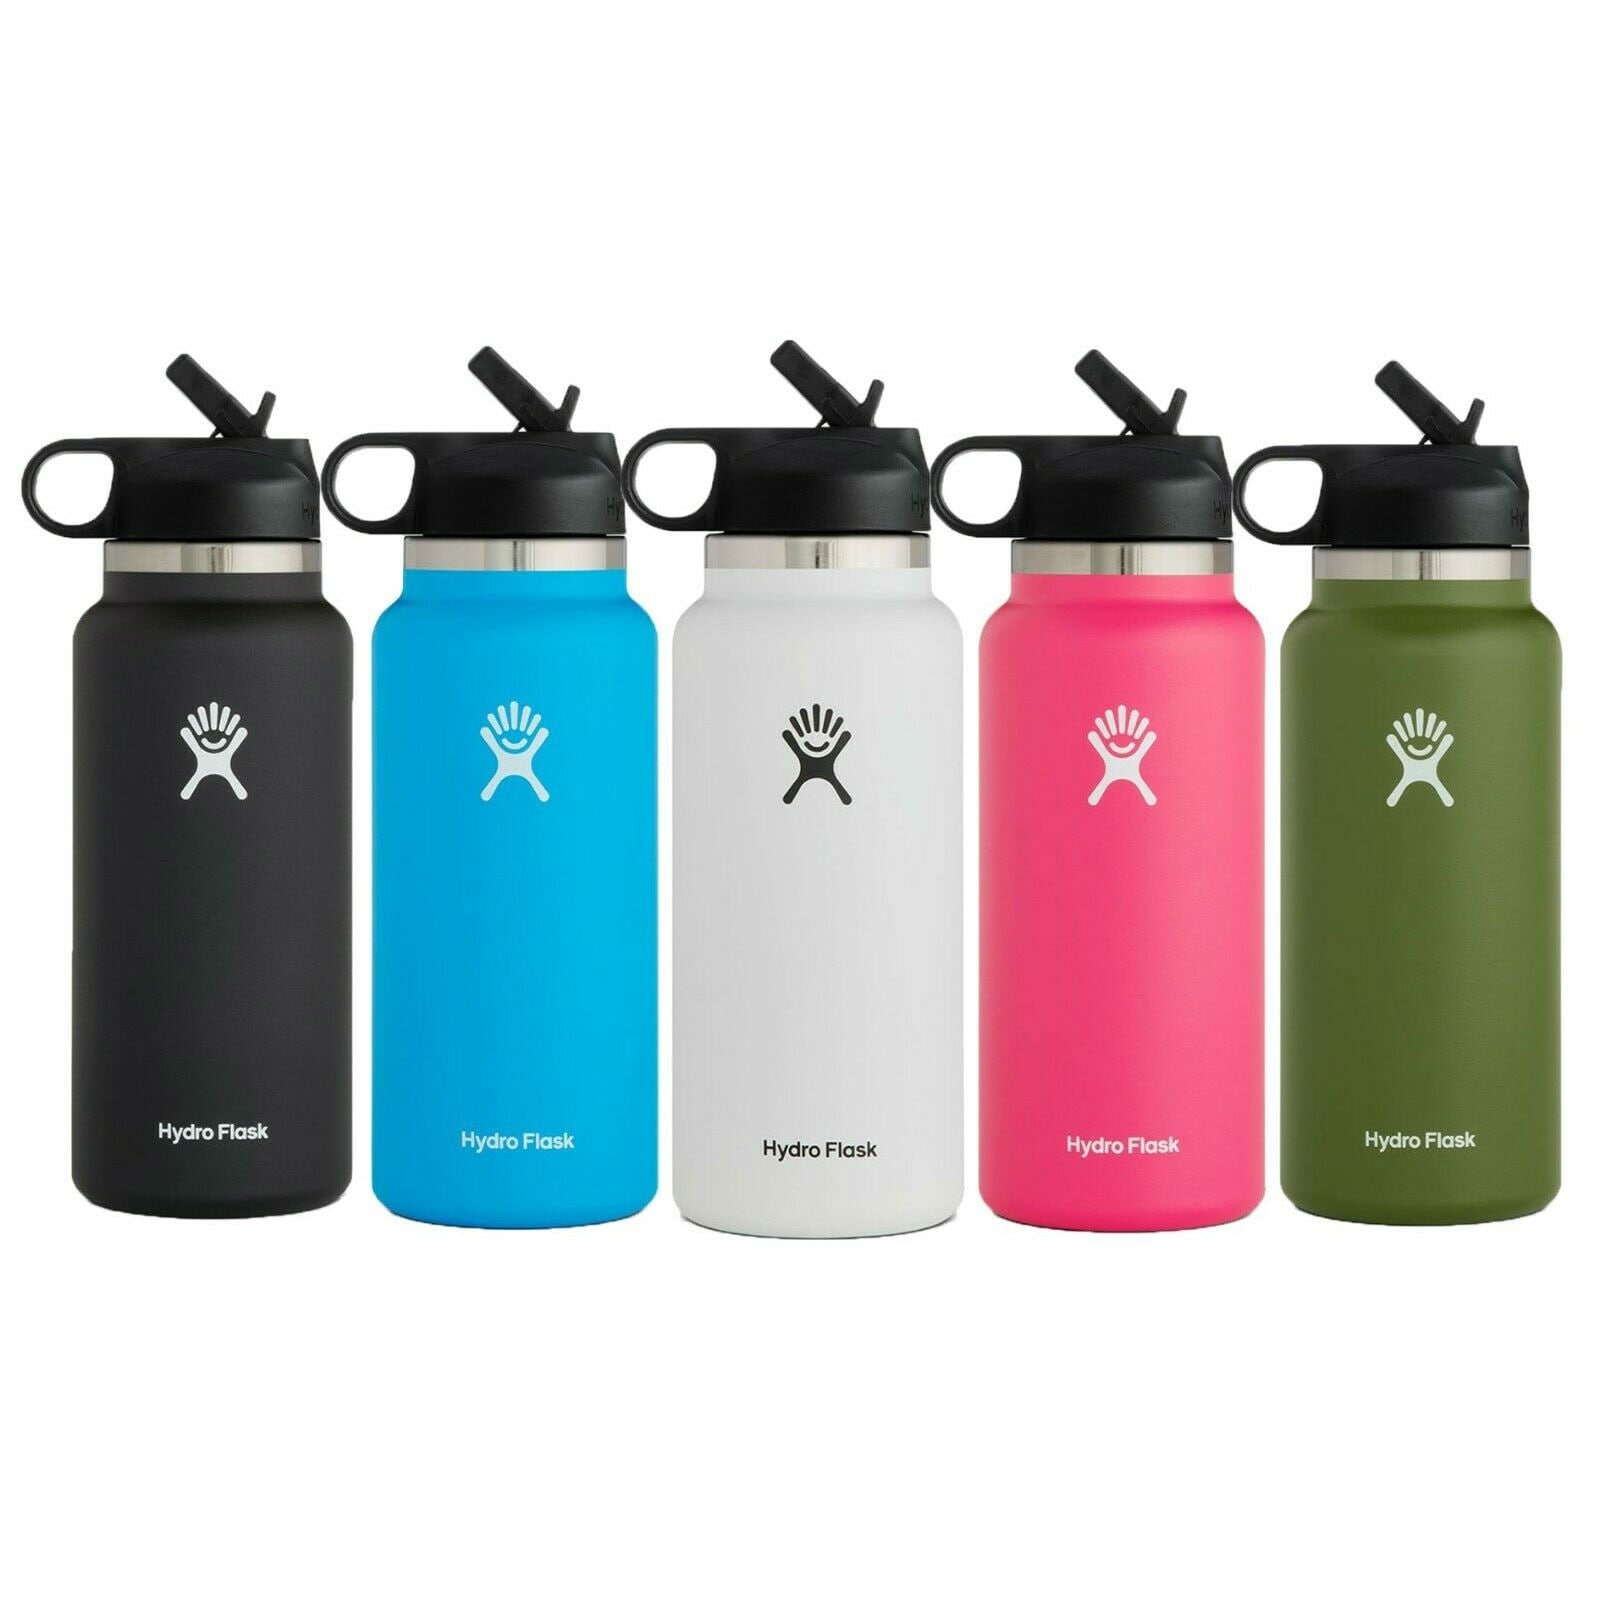 https://ak1.ostkcdn.com/images/products/is/images/direct/8ba90efa1d2a22784a51bc5b9802b52e5cc4fb5b/Hydro-Flask-2.0-Stainless-Steel-Wide-Mouth-Water-Bottle-with-Straw-Lid--32oz.jpg